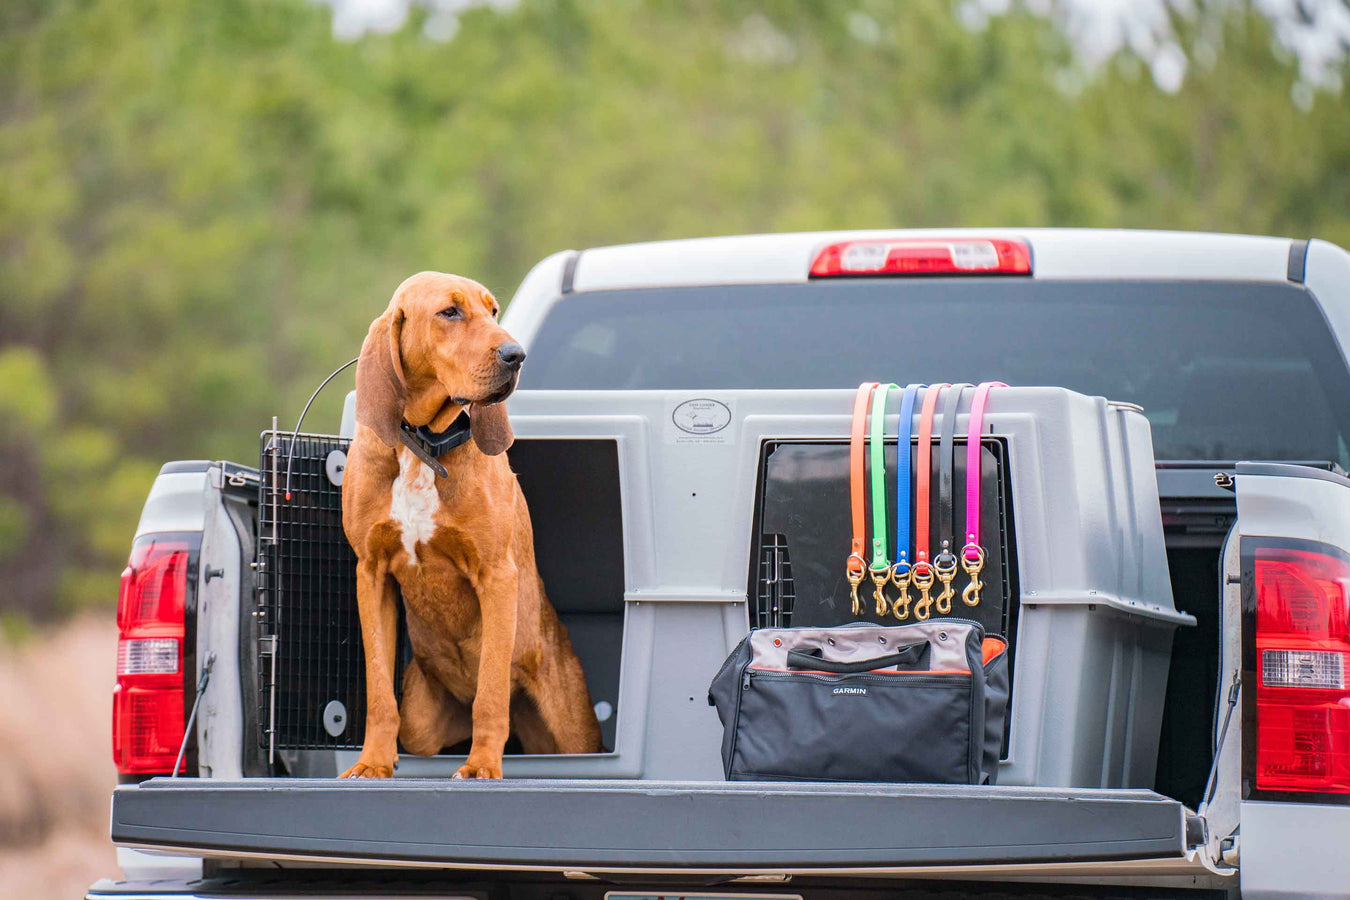 Hound dog in the back of truck with kennel